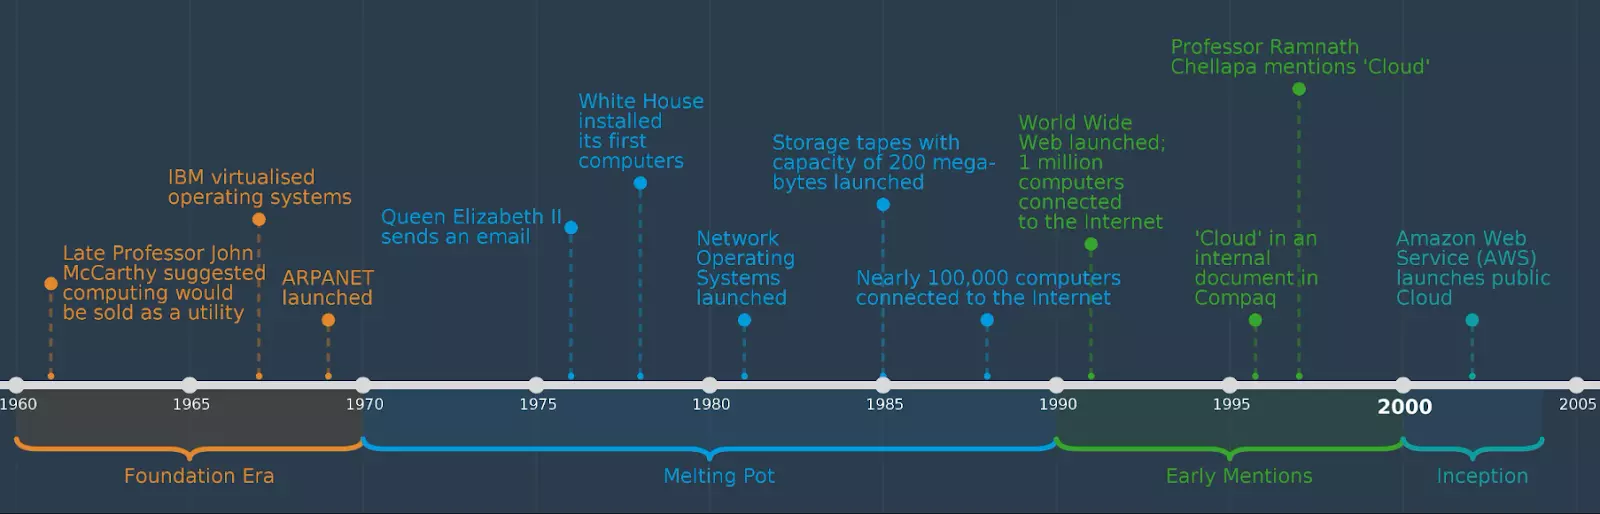 history of the cloud